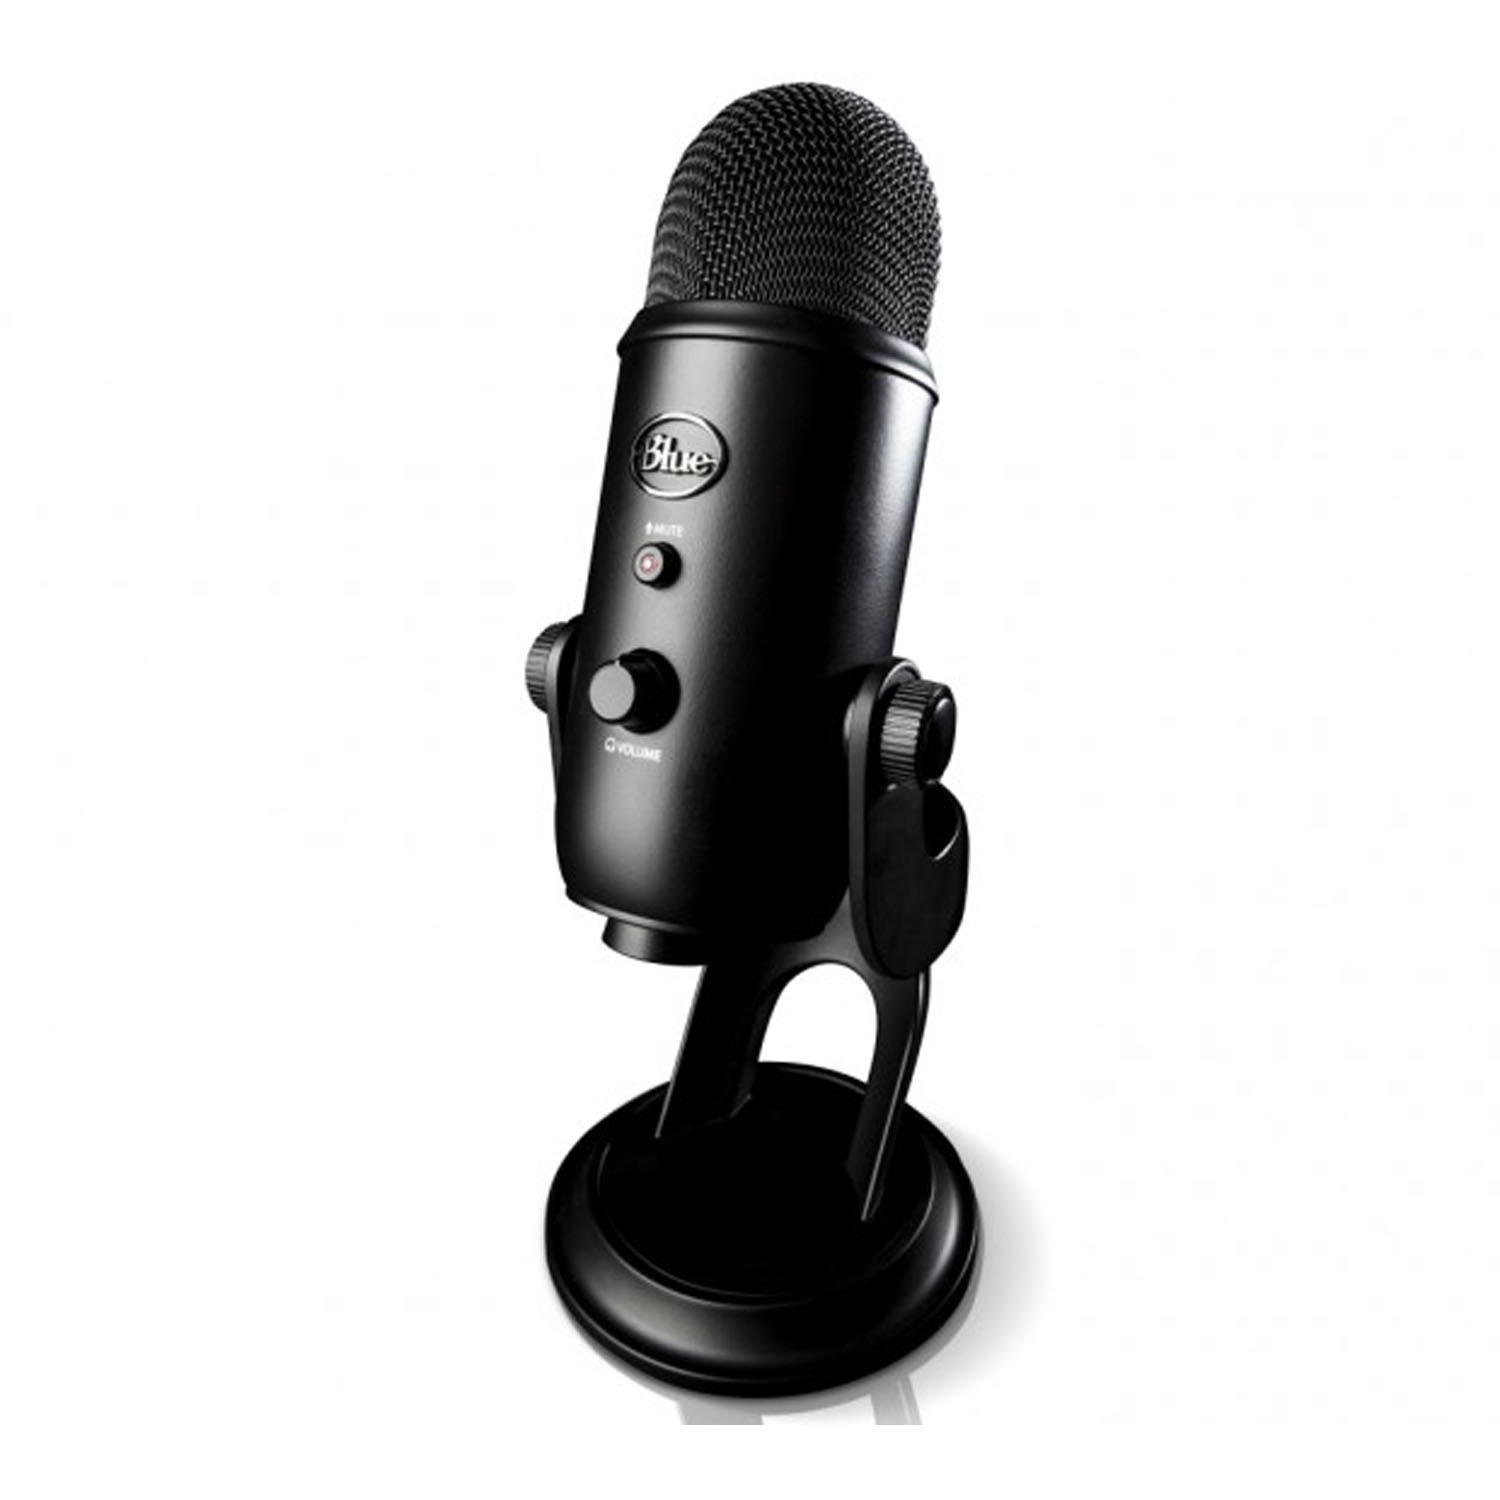 Sonictrek Studio Streaming Podcaster USB Microphone With Desk